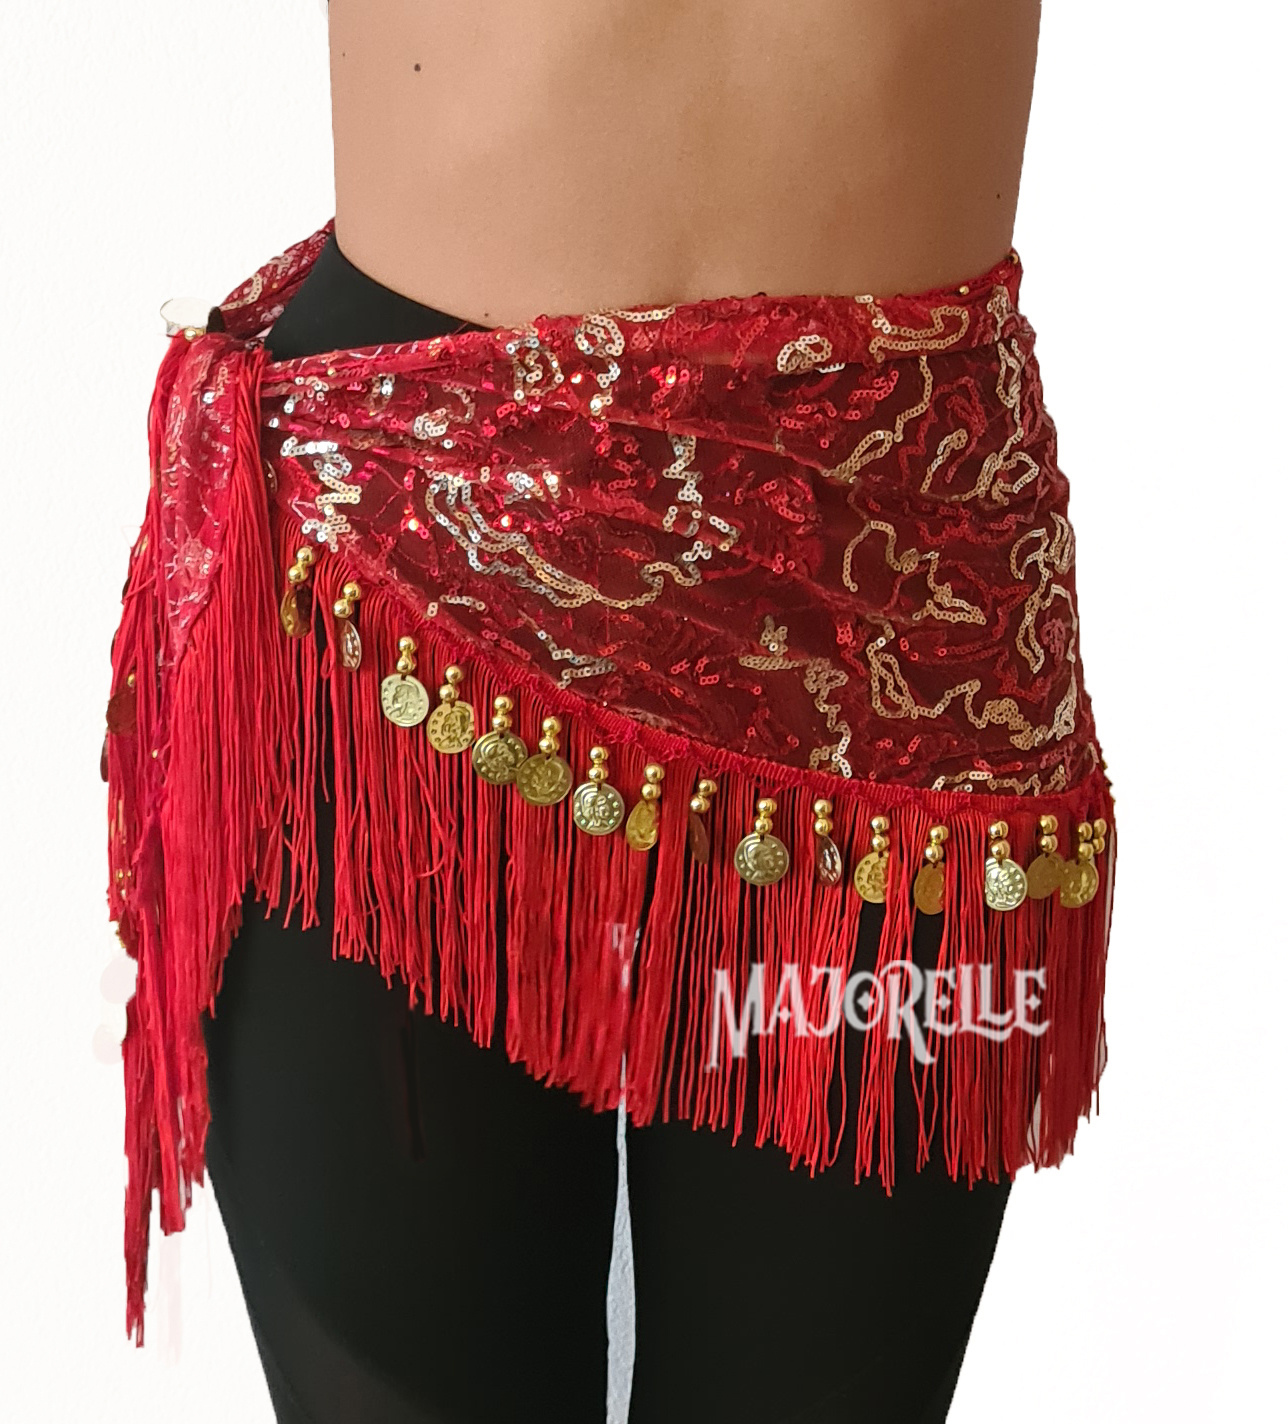 Hip scarf red with gold and silver accents, with gold coins